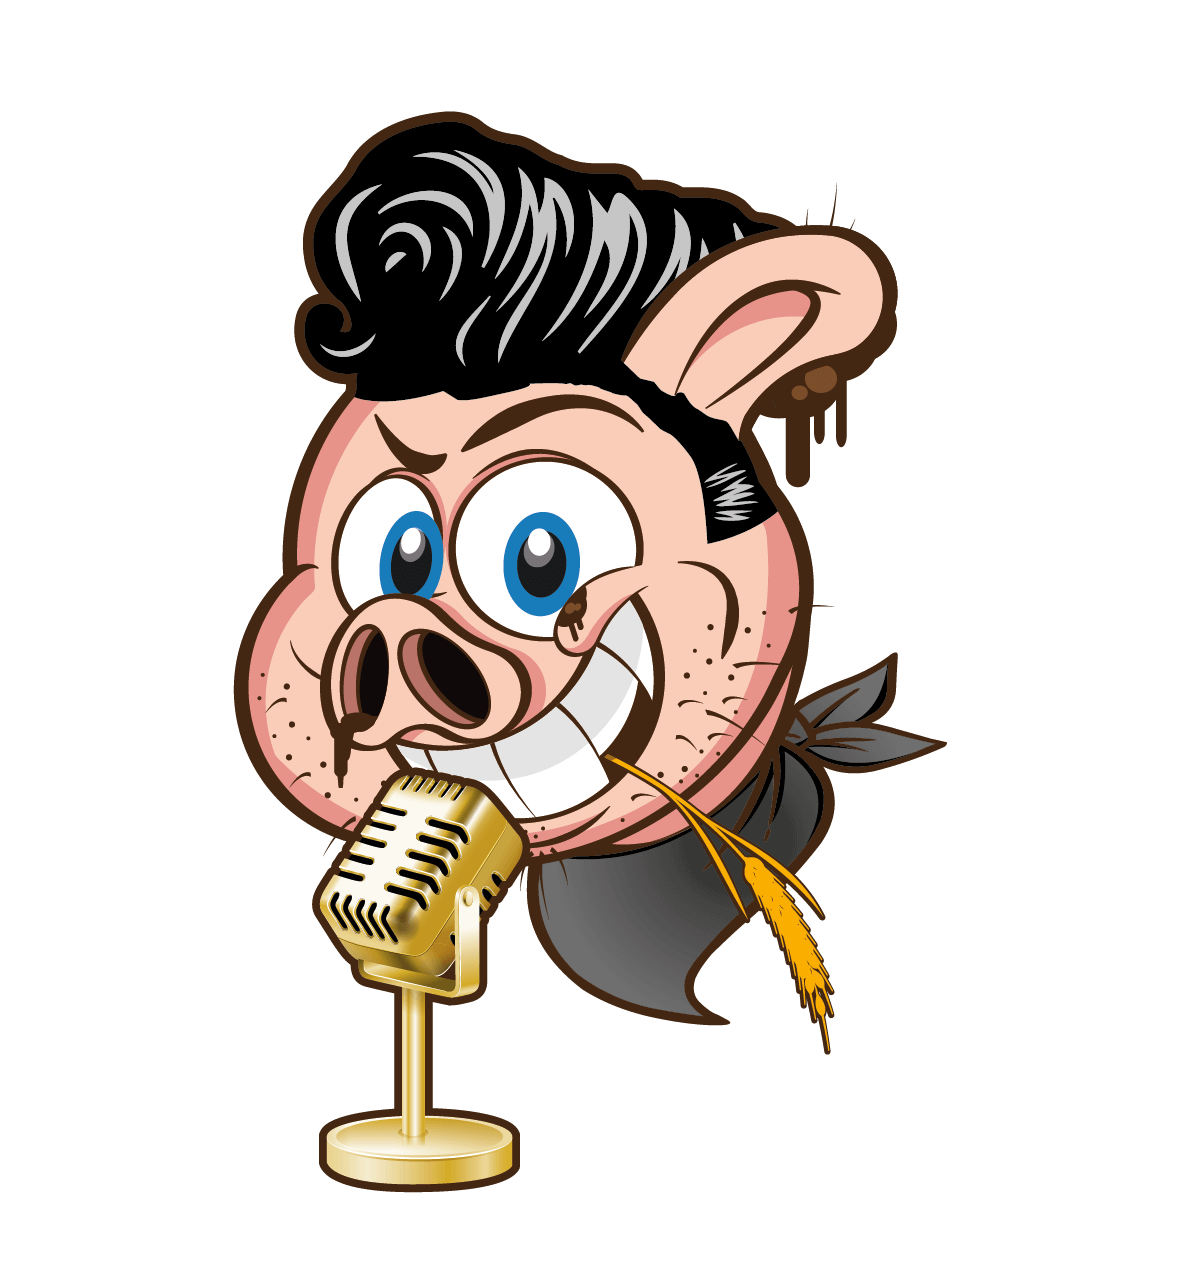 Rock and roll steven pig-02-01 (1)